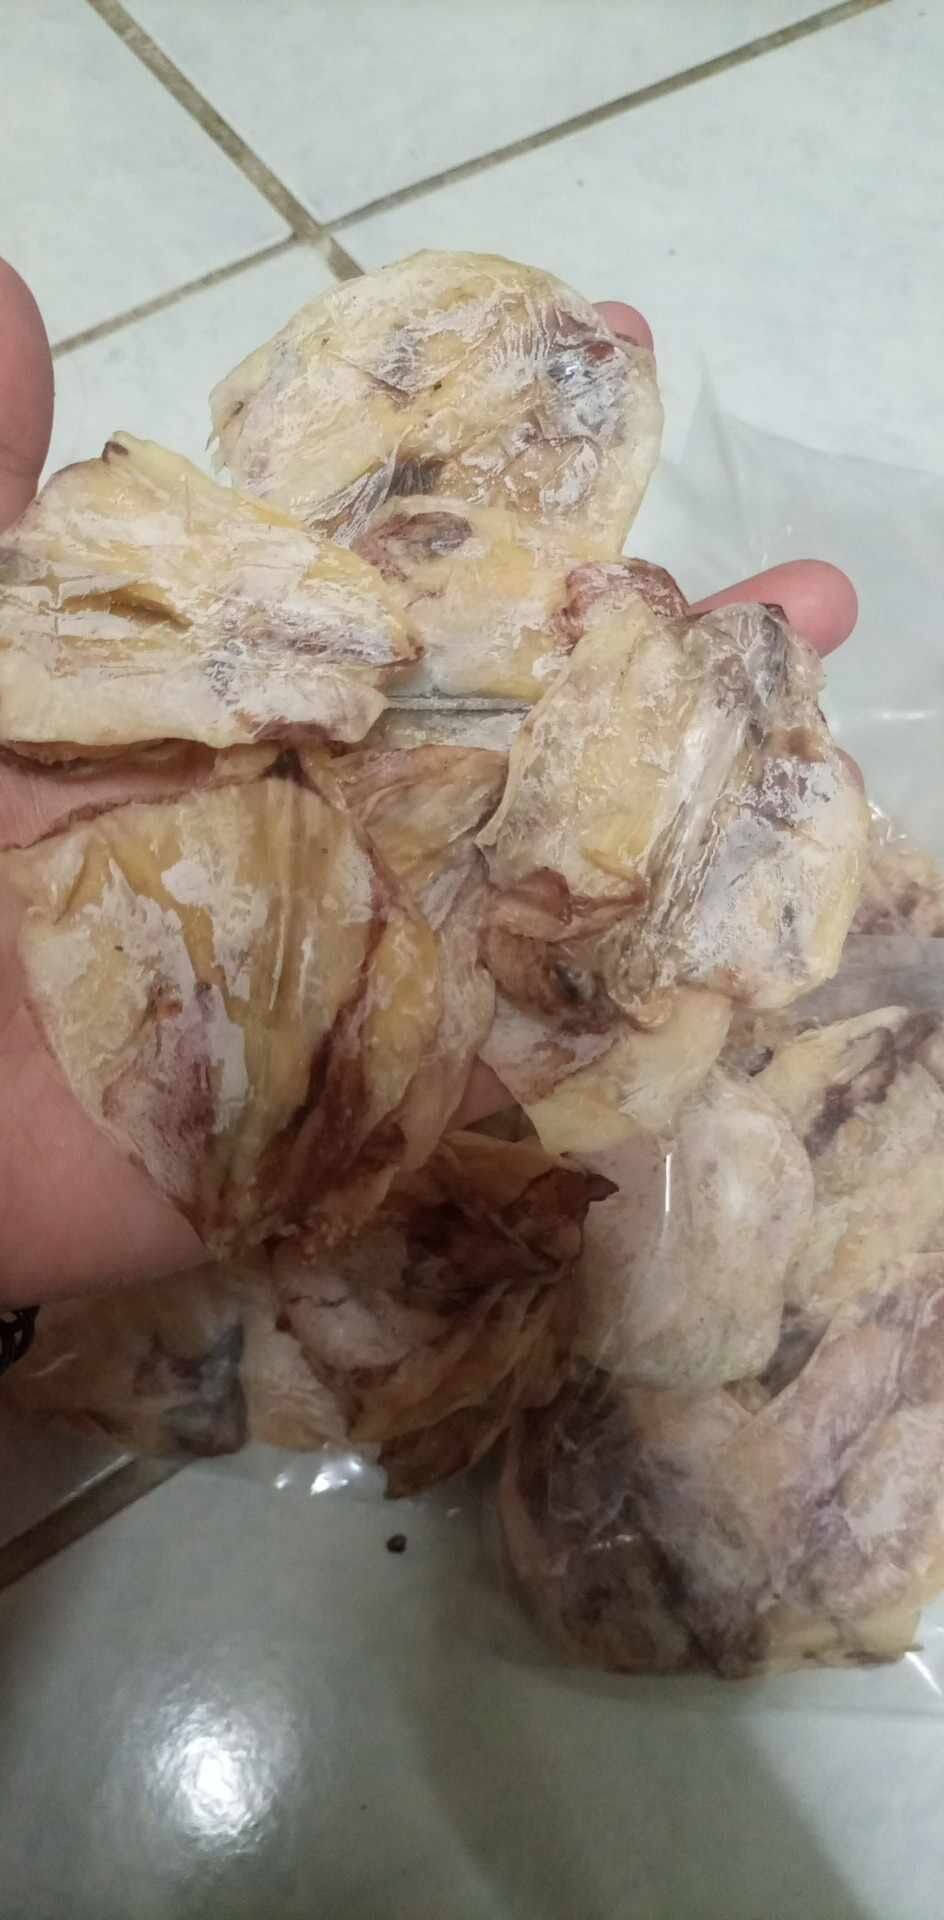 Stockfish of Ling in 45 kg bales.